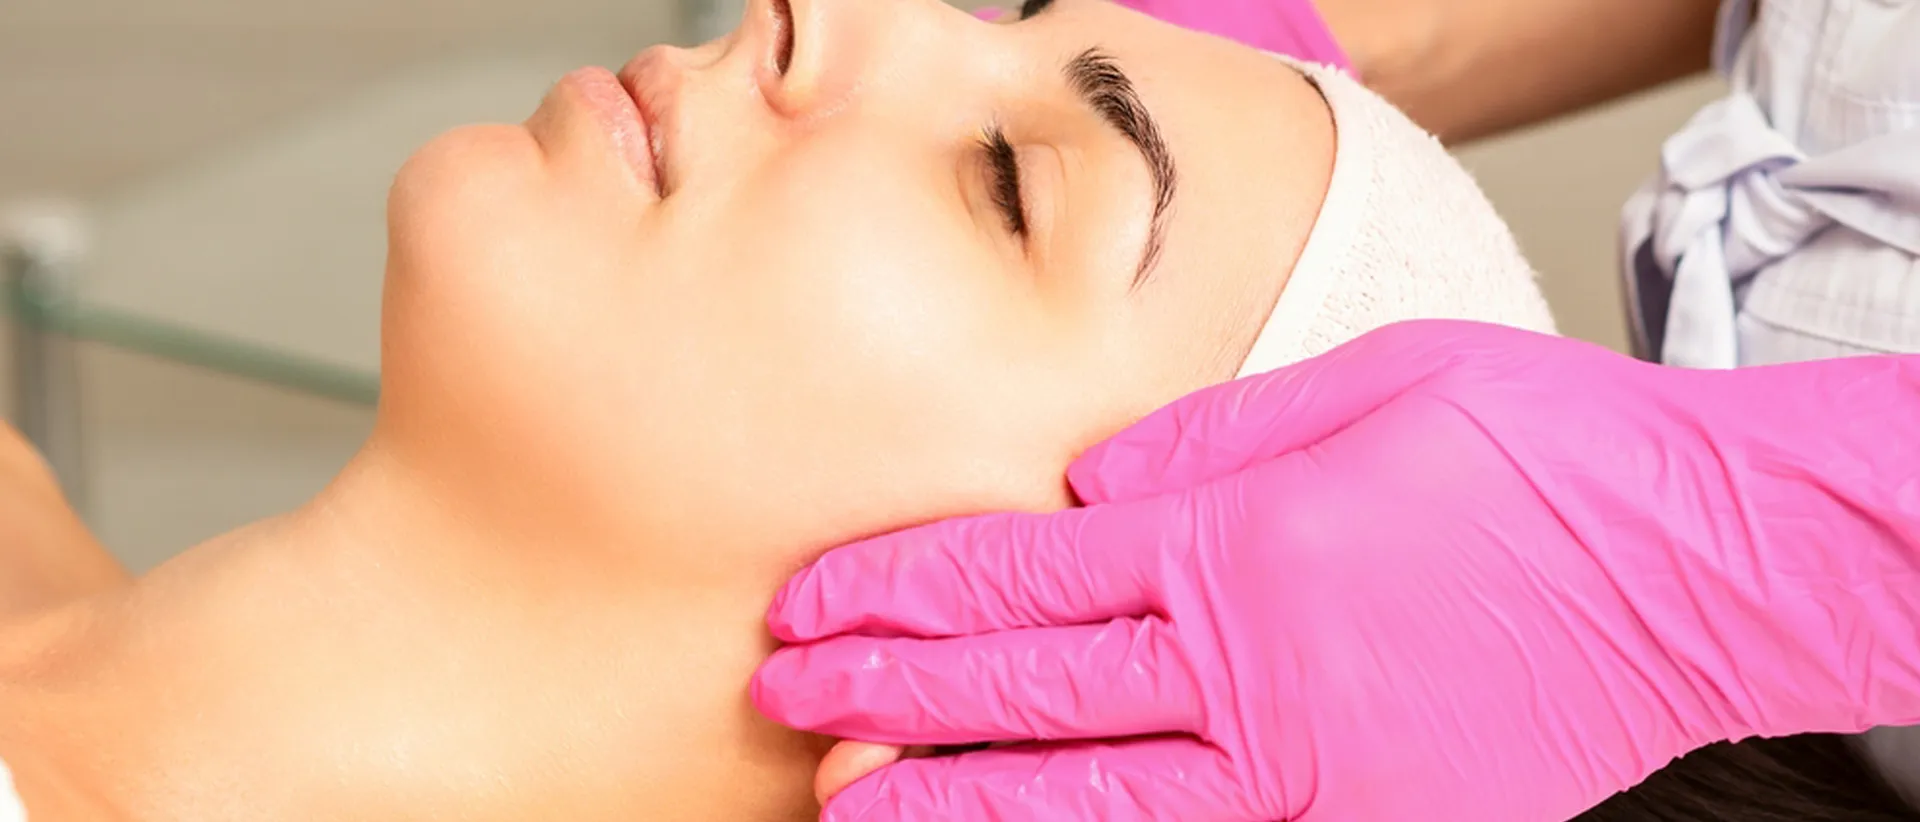 Fair woman face undergoing peels treatment at cosmetic skin care clinic.
